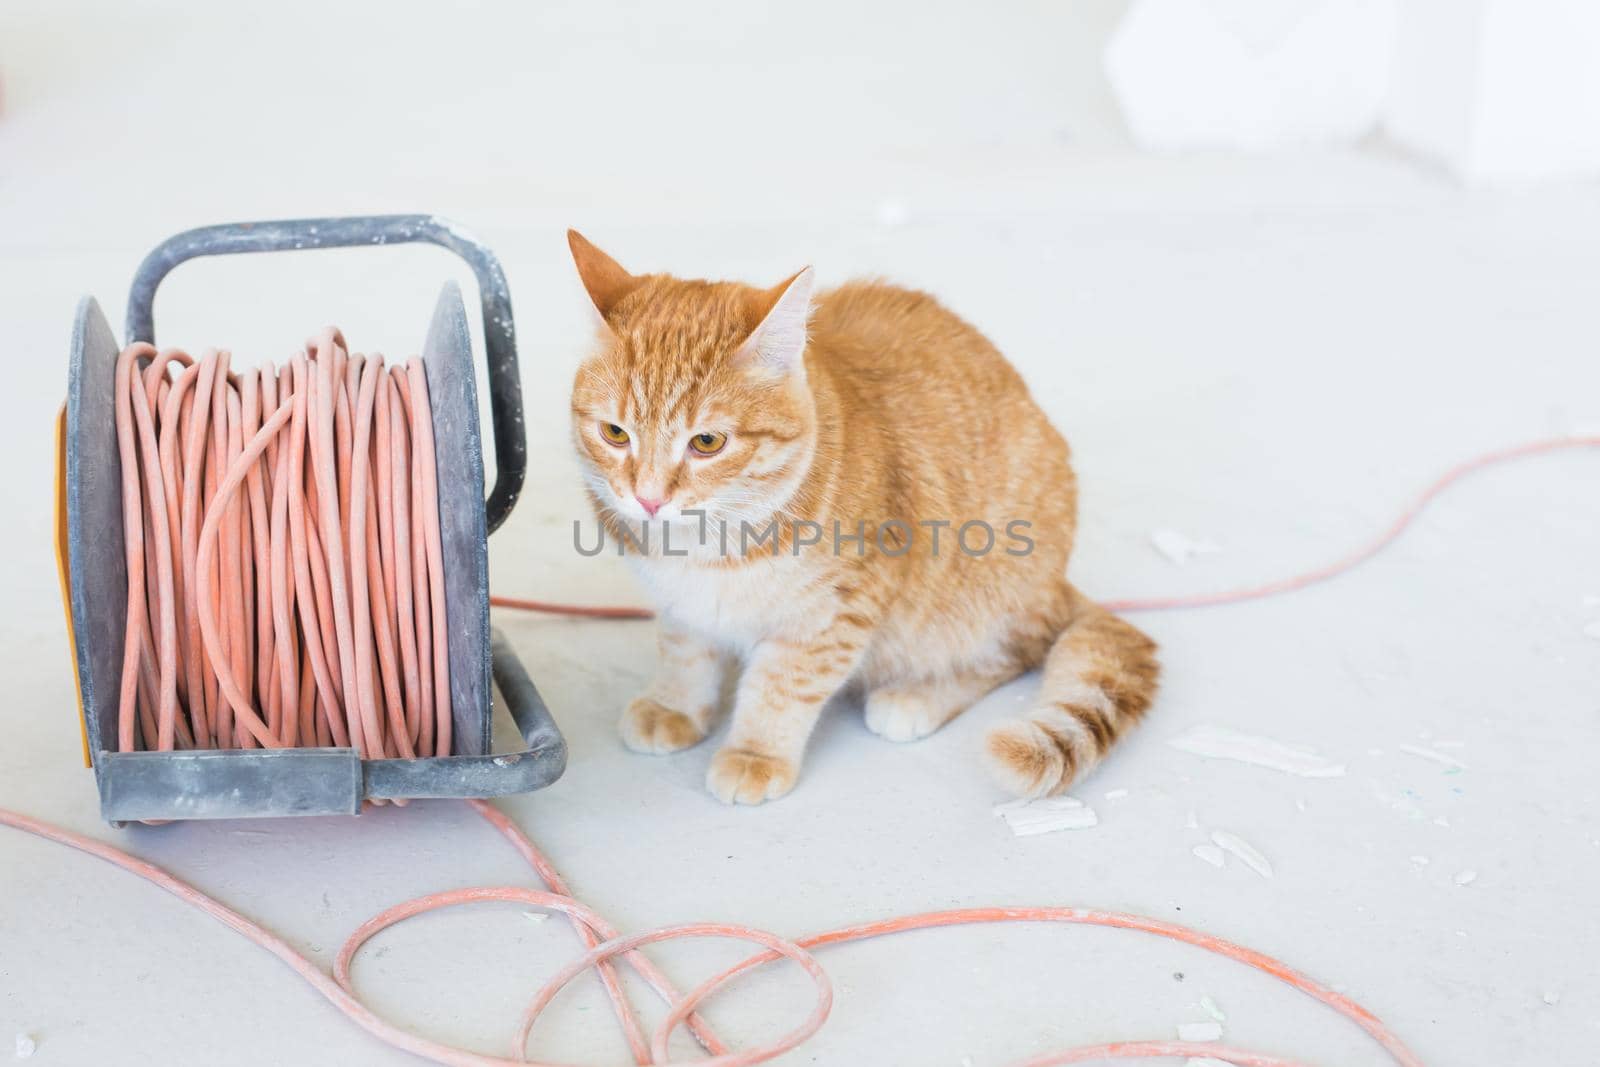 Renovation, repair and pet concept - Cute ginger cat sitting on the floor during redecoration.